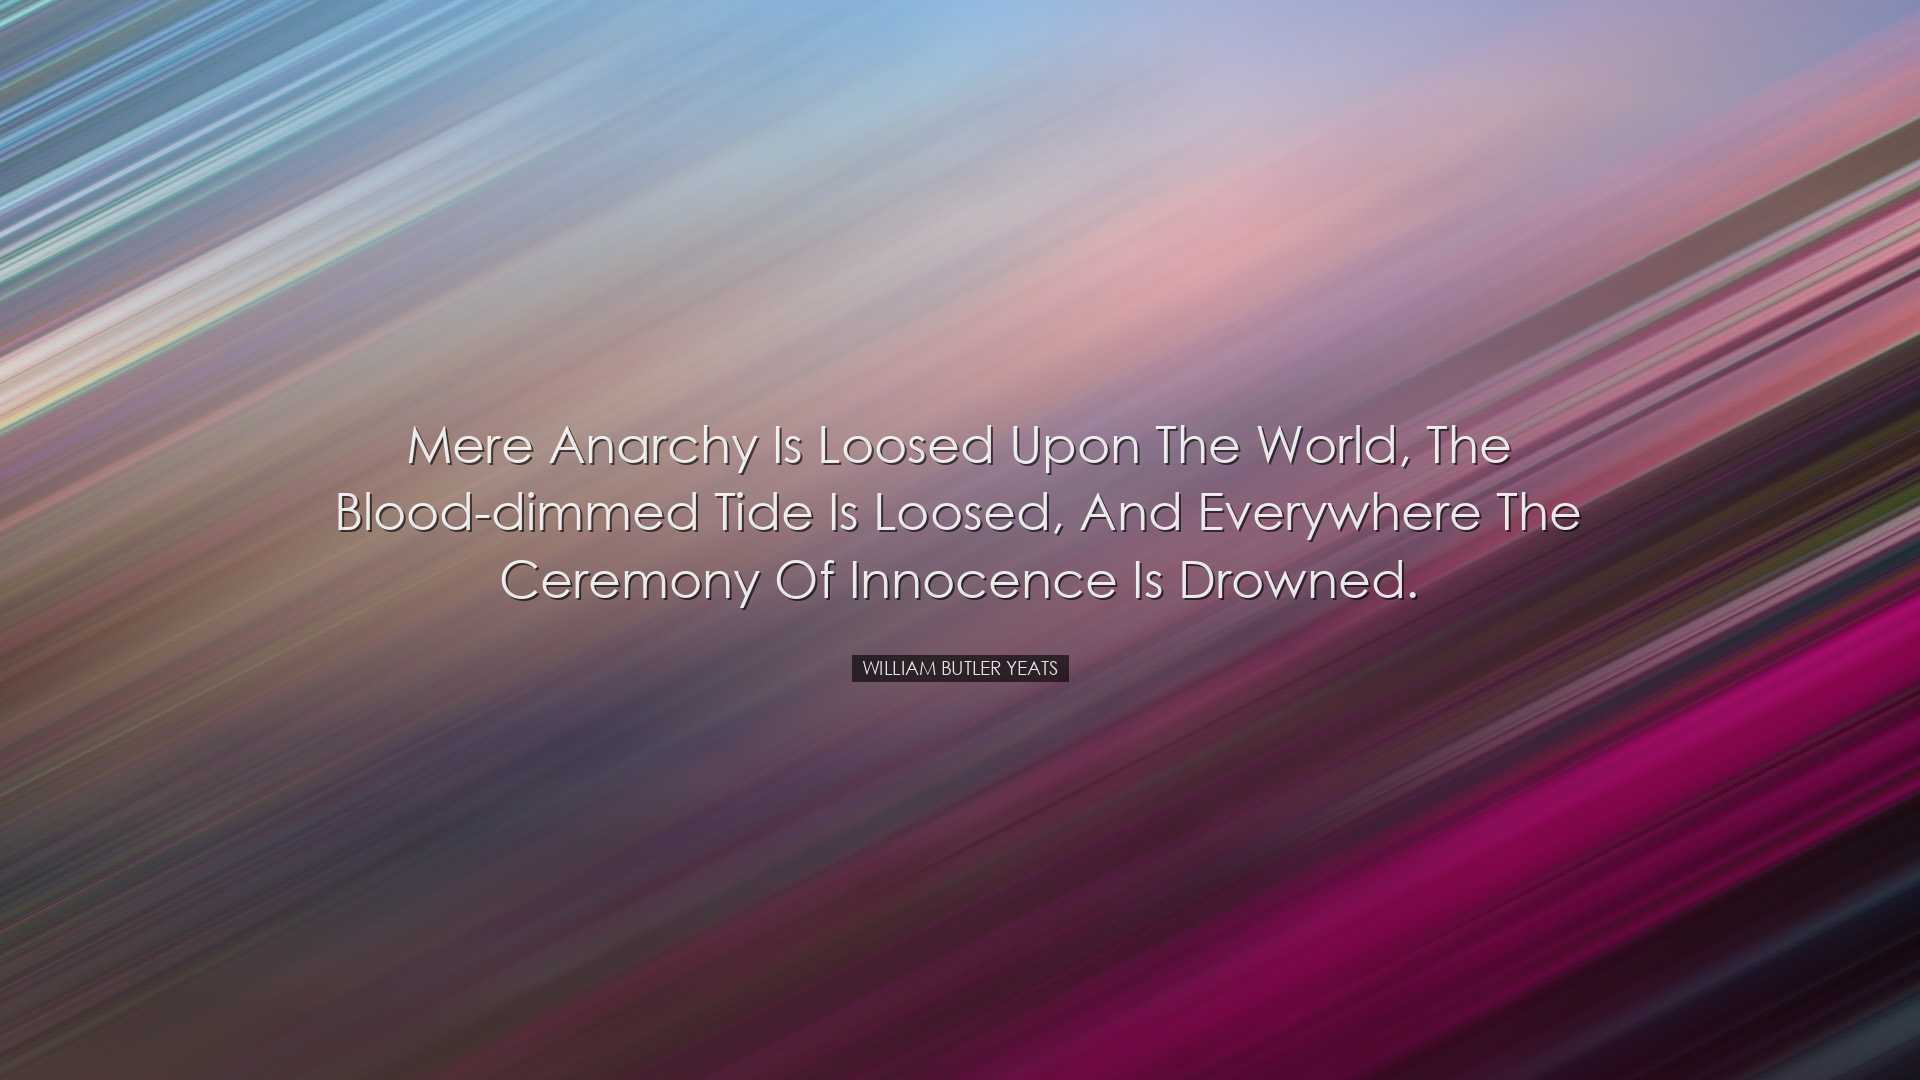 Mere anarchy is loosed upon the world, the blood-dimmed tide is lo